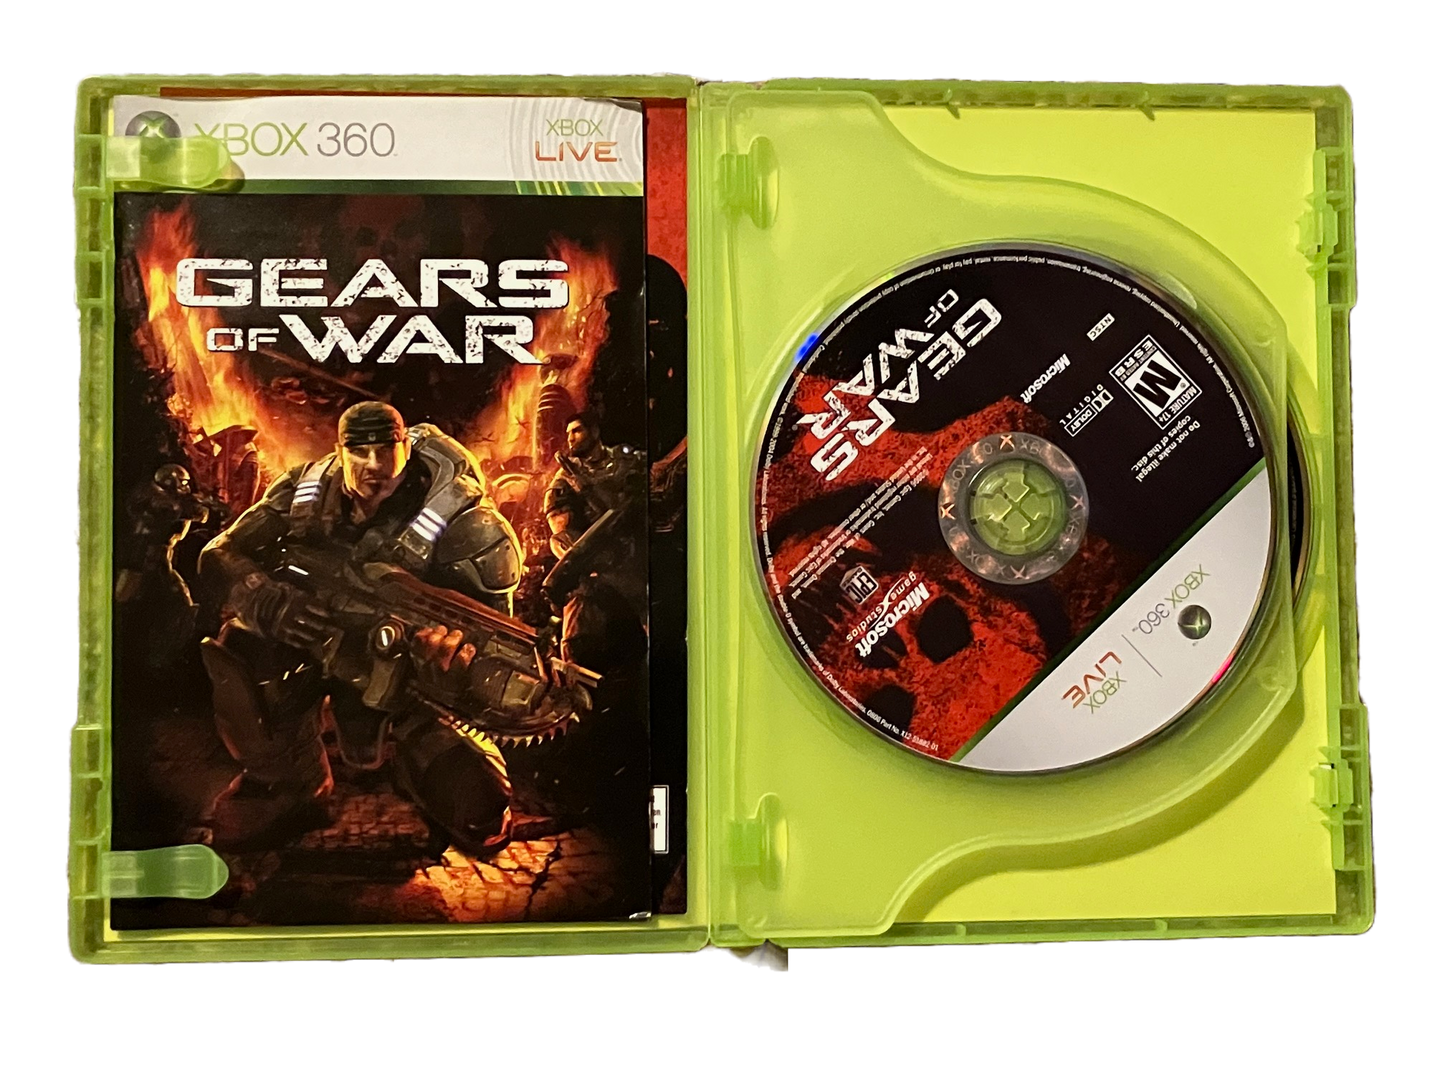 Gears of War Xbox 360 Complete